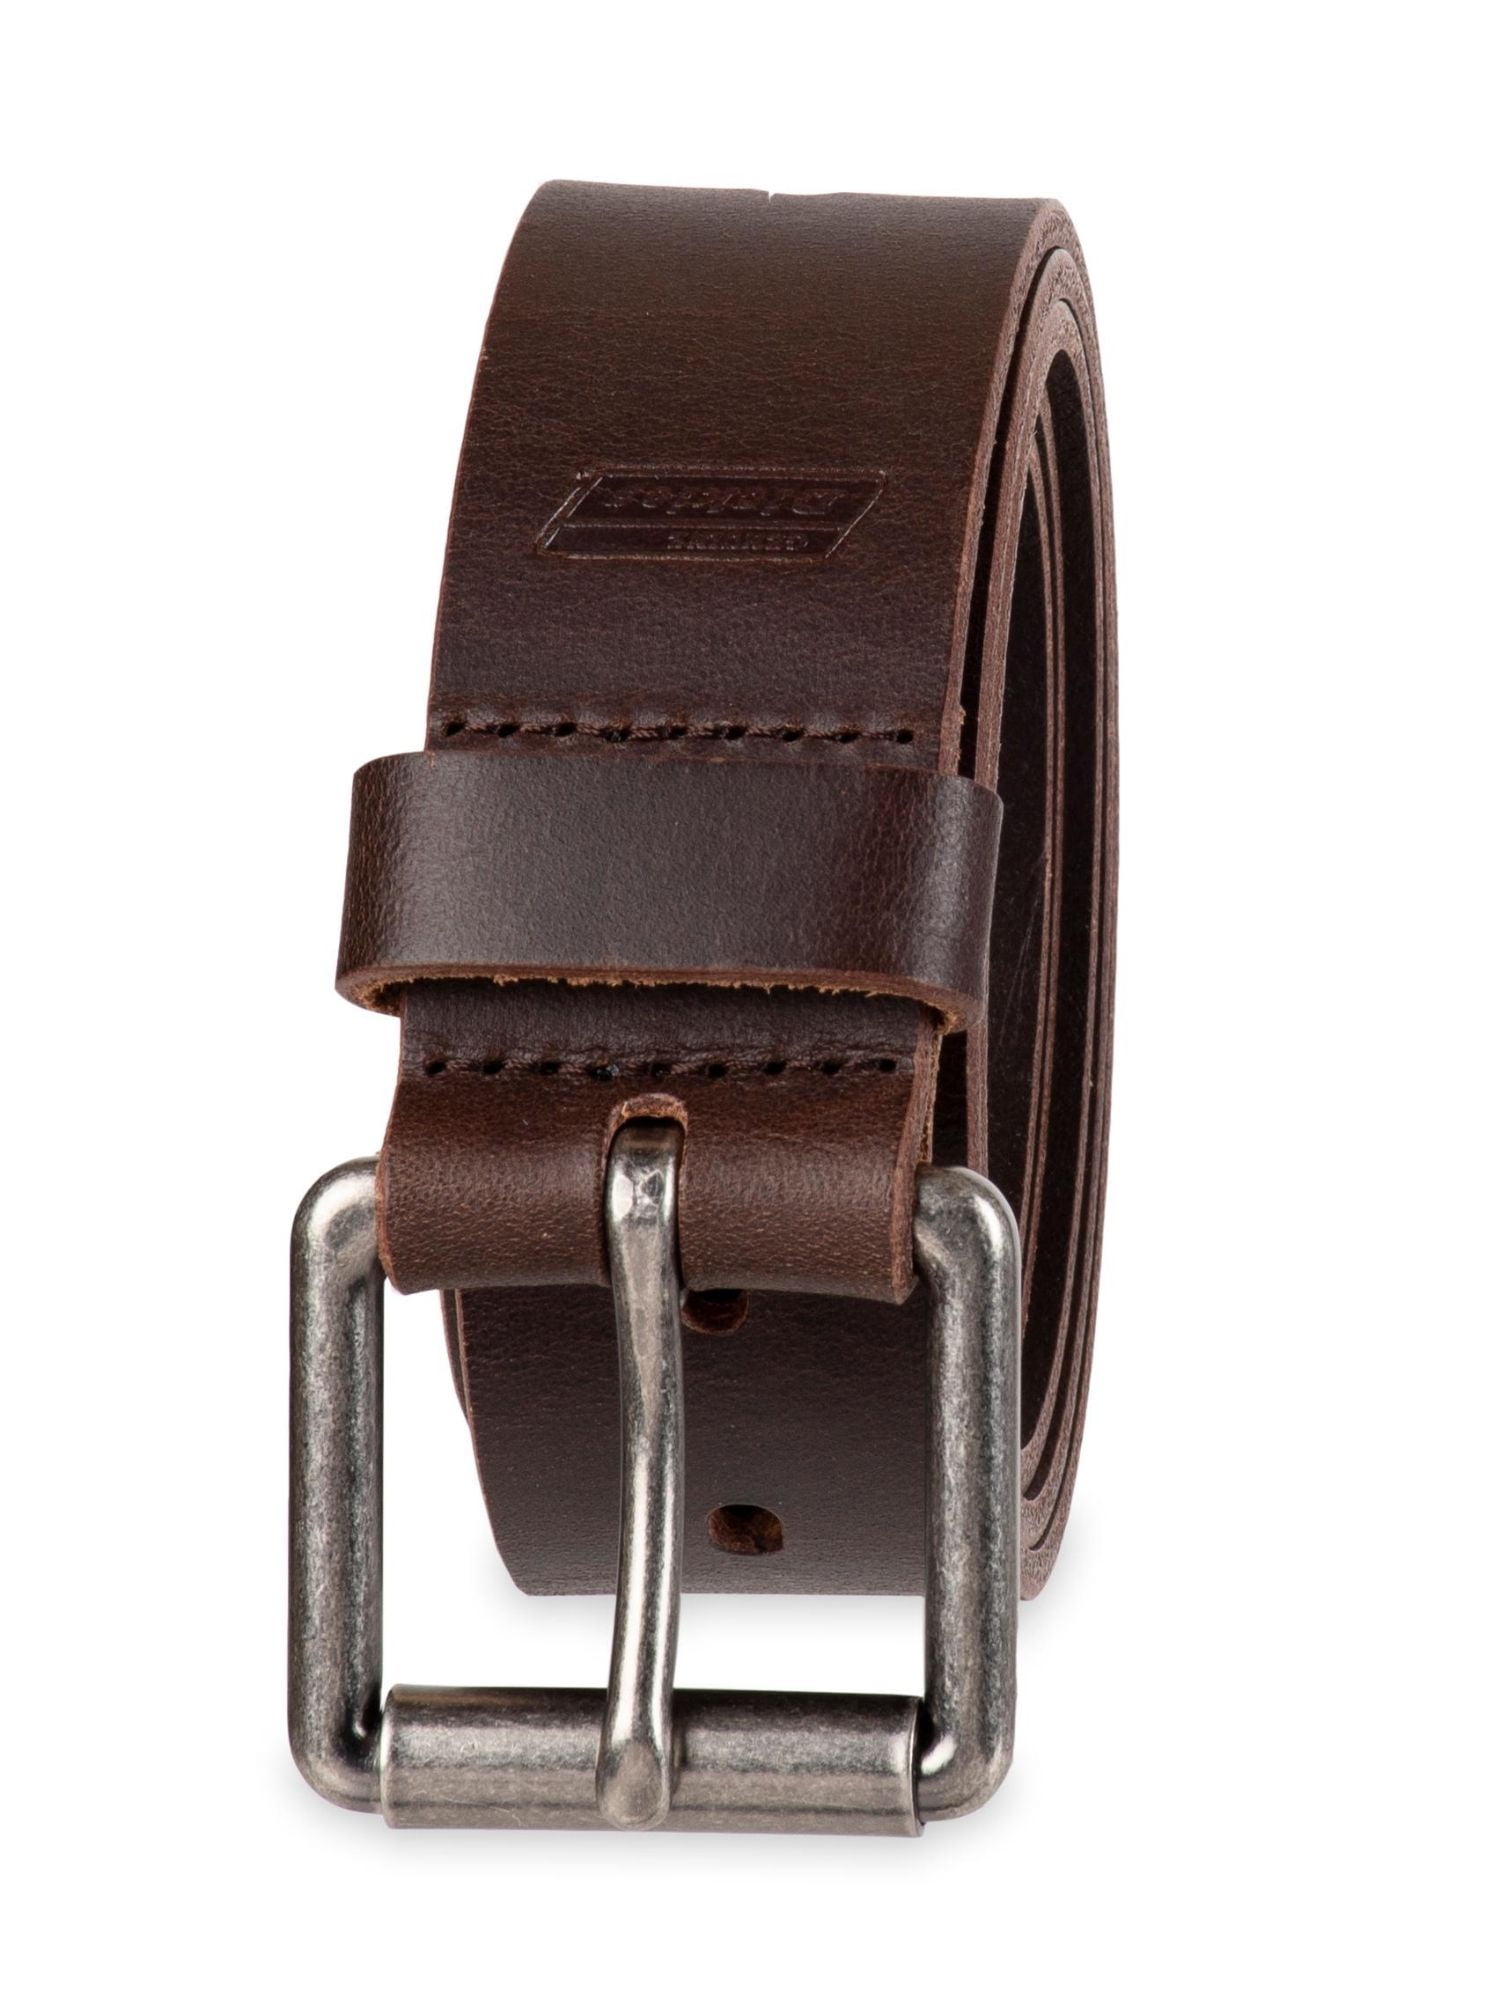 Dudes Soft Genuine Leather Tan Color Double Stitched Pin Buckle 40mm Wide Belts